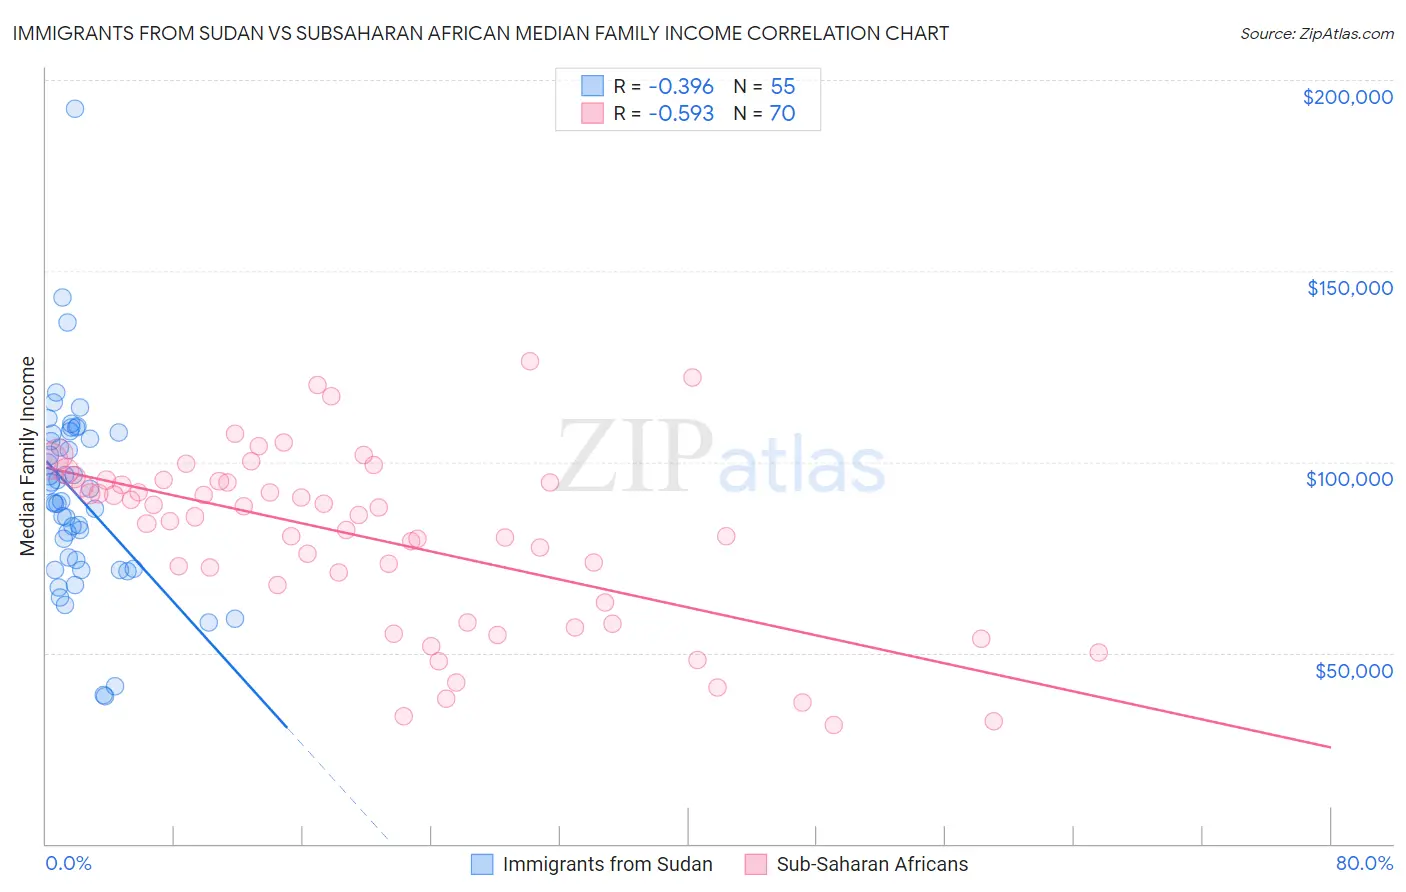 Immigrants from Sudan vs Subsaharan African Median Family Income